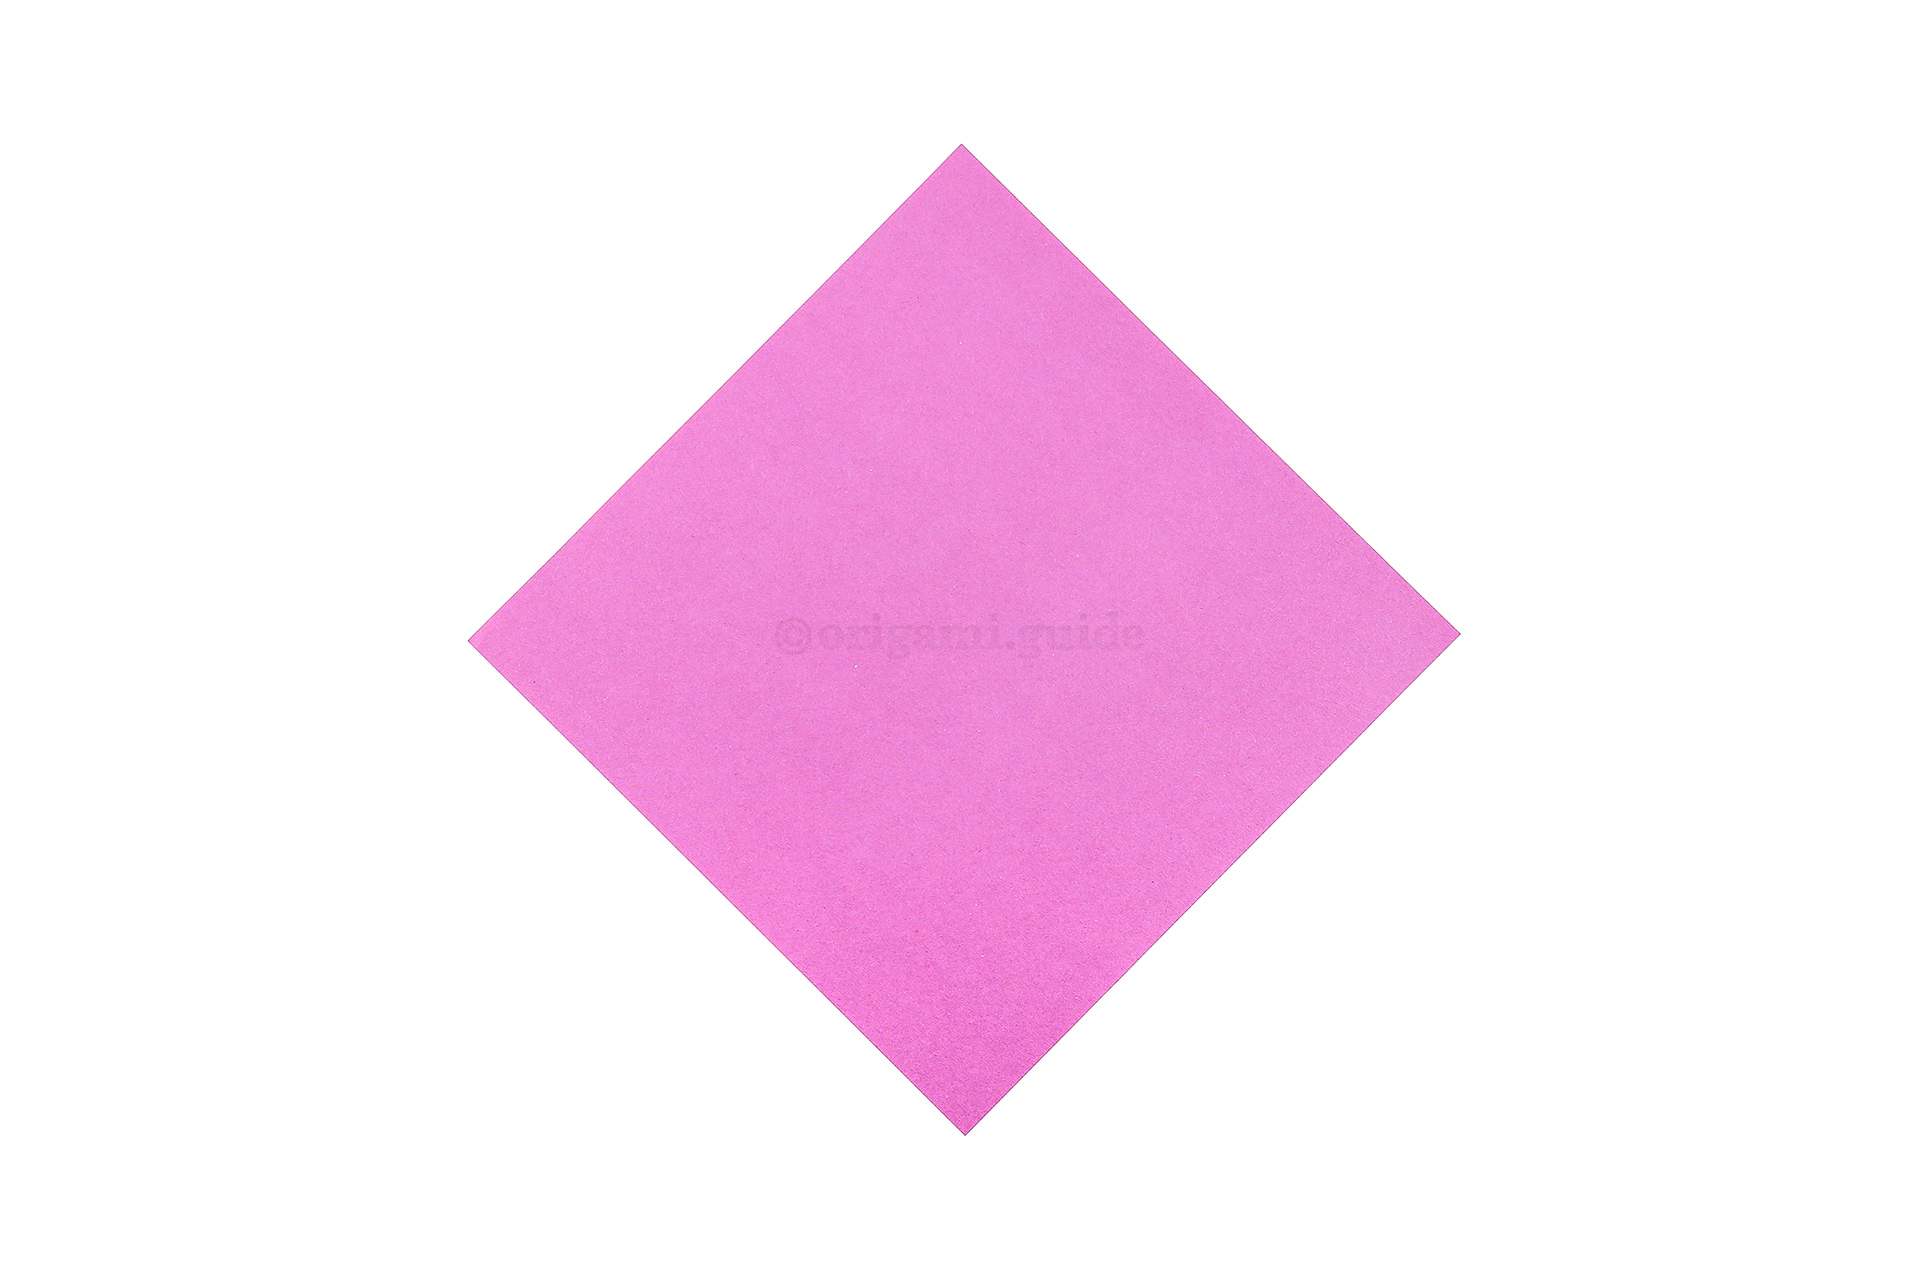 This is the back of the origami paper, which may be white if you are using origami paper. This colour will not be visible in the final bunny face.